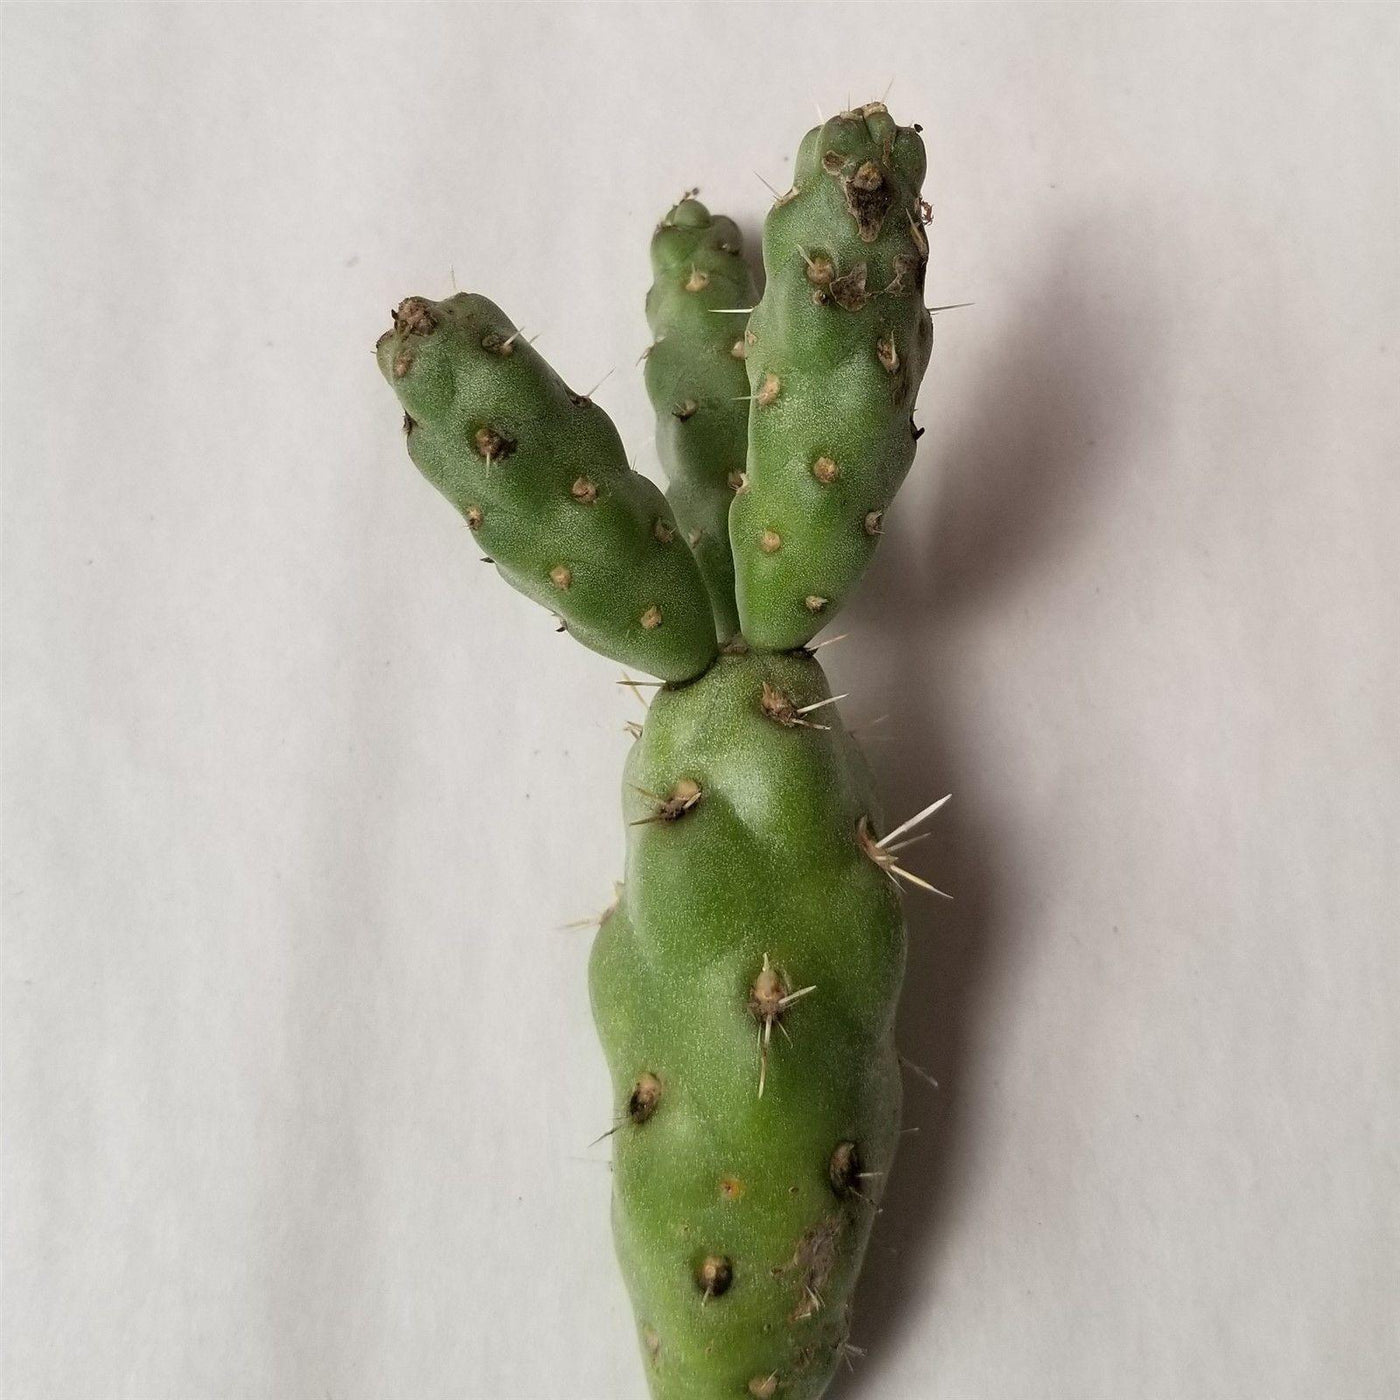 Cylindropuntia Imbricata cholla unrooted cuttings